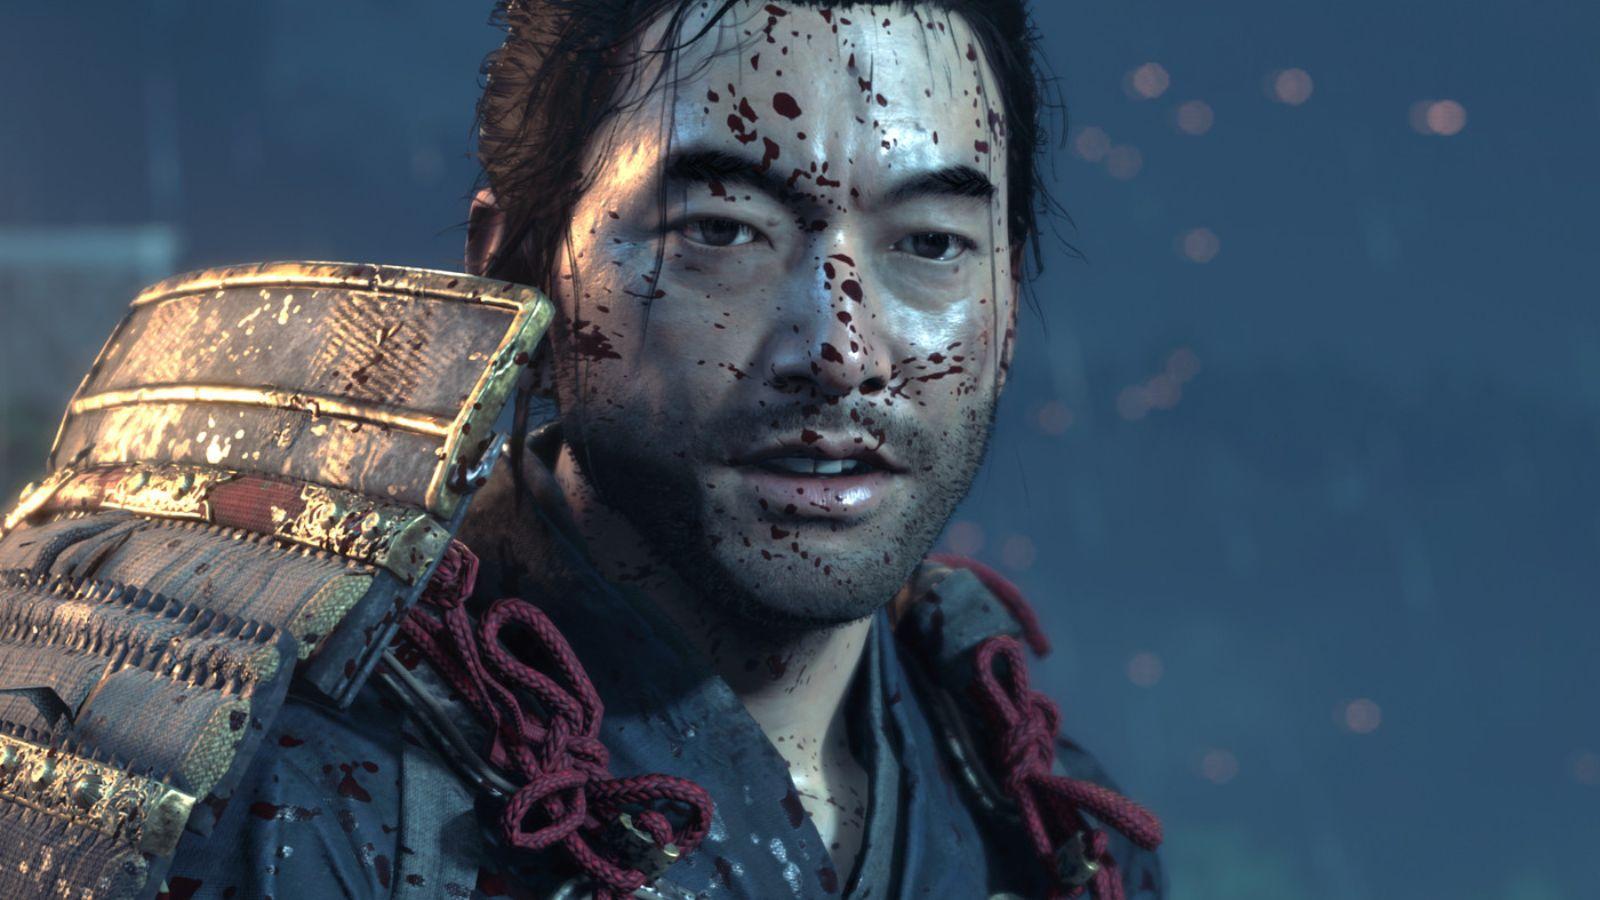 Sony Making 'Ghost of Tsushima' Movie With 'John Wick' Director